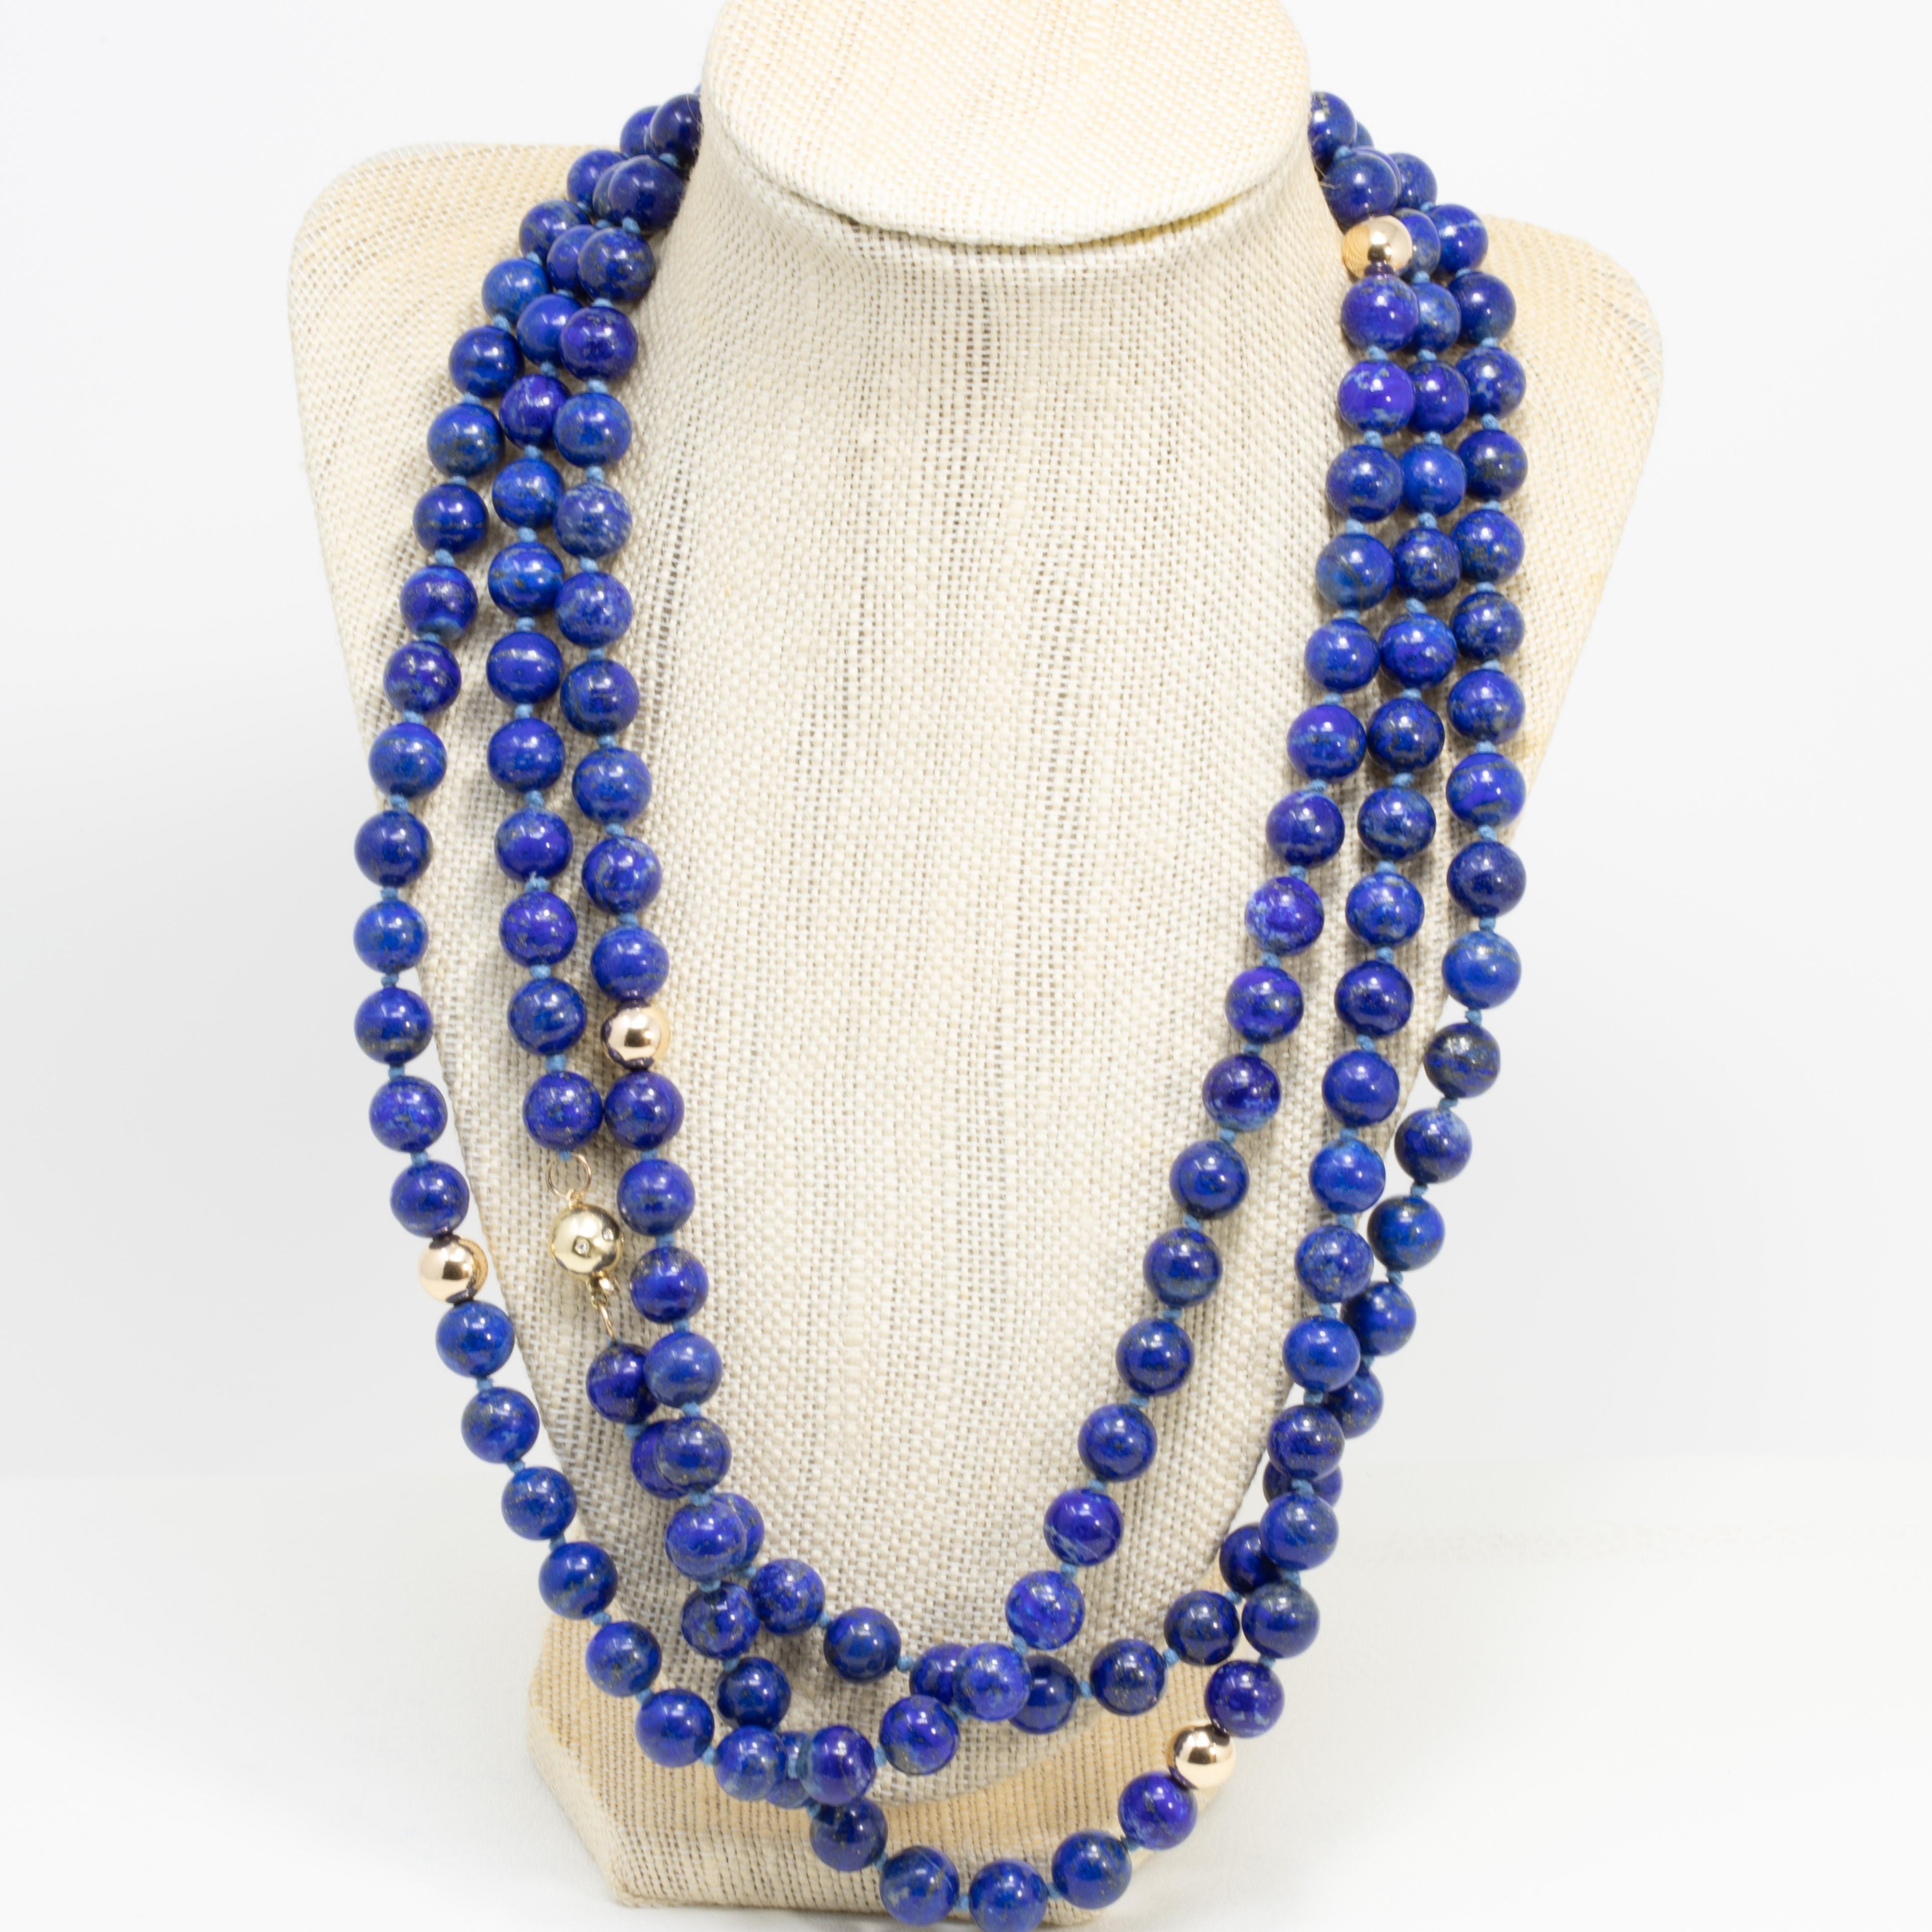 An exquisite genuine lapis lazuli bead necklace. Features a long strand of 10mm lapis lazuli beads accented with 14K gold beads. The 14 karat gold ball clasp is decorated with clear diamonds. A refined accessory fit for the most sophisticated